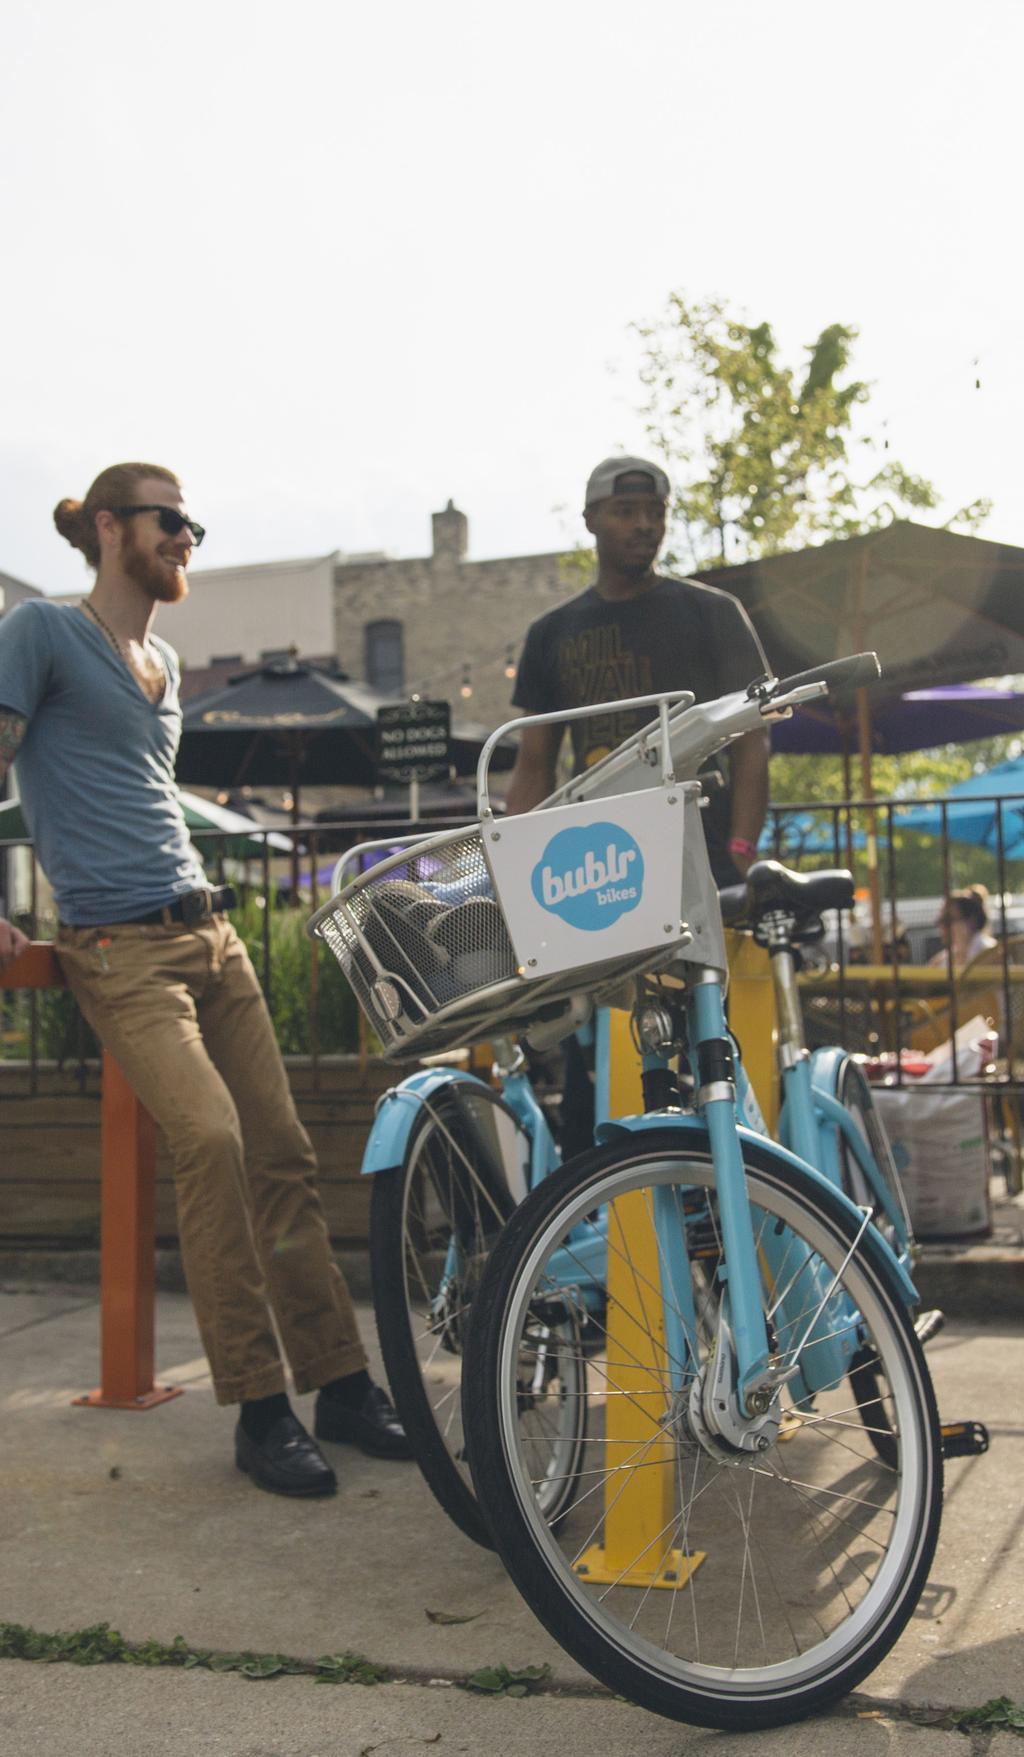 We unveiled Bublr Bikes on August 6, 2014, at Red Arrow Park and it was a HUGE hit! The excitement was palpable as everyone wanted to take them for a ride.